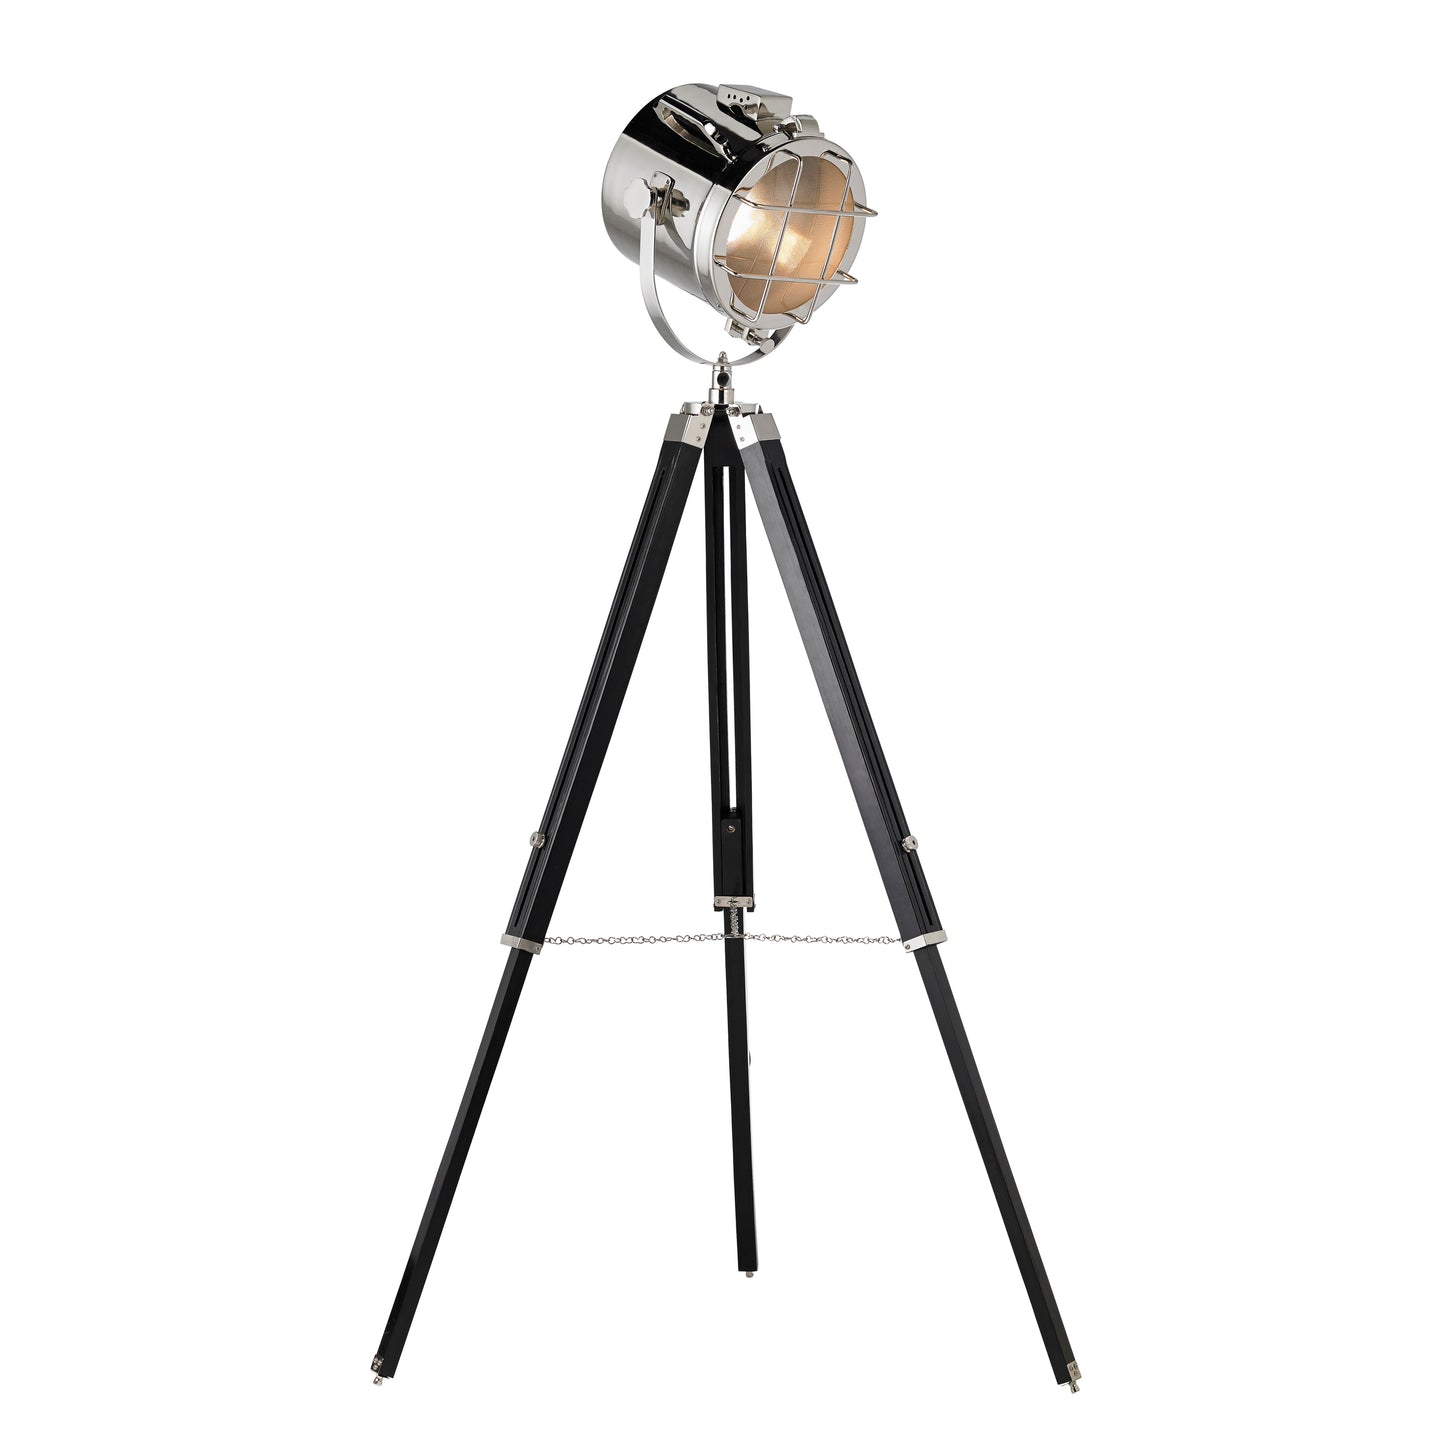 A Nautical Floor Lamp from Kikiathome.co.uk, perfect for interior decor and home furniture, adorned with a black shade.